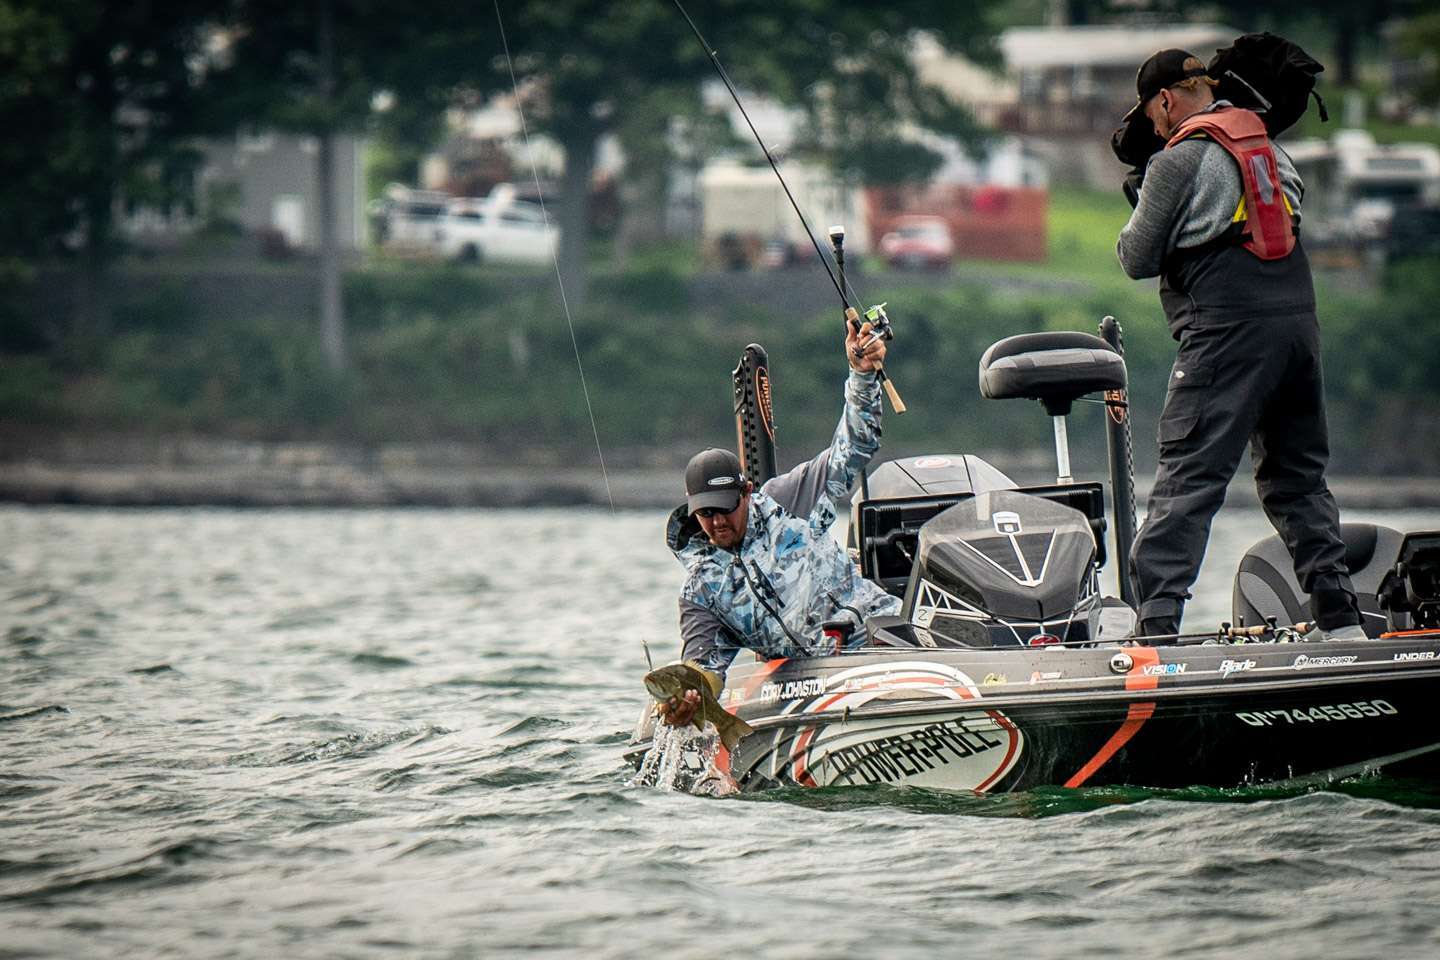 

<h4>Cory Johnston (10-1)</h4>
<p><b>Cavan, Canada</b><br />
Cory Johnston was one of several anglers who double-qualified for this year’s Classic, finishing fifth in the AOY standings and claiming his first career victory with B.A.S.S. at the Bassmaster Northern Open at 1000 Islands. He finished 11th or better in four of his last five tournaments to finish 2021, including his Opens victory. During his one trip to Hartwell with B.A.S.S., he placed 14th at the Elite in 2019. Since the Johnstons have been such a force working together on the Elite Series, it’s only sensible to think they’ll finish somewhere near each other in the standings at the Classic.<br />
” class=”wp-image-567937″ width=”1440″ height=”960″/><figcaption>
<h4>Cory Johnston (10-1)</h4>
<p><b>Cavan, Canada</b><br />
Cory Johnston was one of several anglers who double-qualified for this year’s Classic, finishing fifth in the AOY standings and claiming his first career victory with B.A.S.S. at the Bassmaster Northern Open at 1000 Islands. He finished 11th or better in four of his last five tournaments to finish 2021, including his Opens victory. During his one trip to Hartwell with B.A.S.S., he placed 14th at the Elite in 2019. Since the Johnstons have been such a force working together on the Elite Series, it’s only sensible to think they’ll finish somewhere near each other in the standings at the Classic.<br />
</figcaption></figure>
<div class=